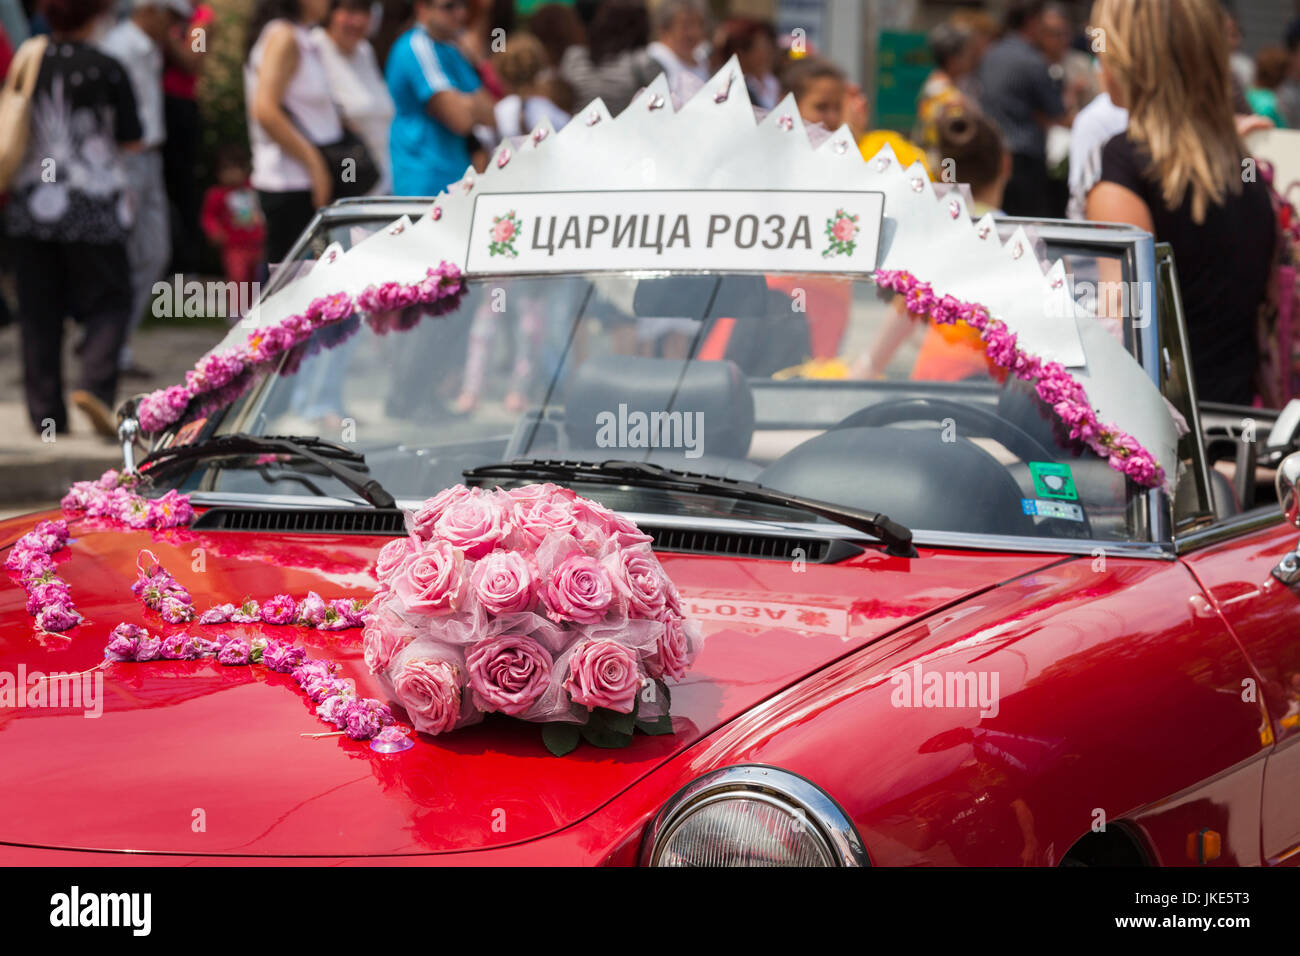 Rose Queen Festival High Resolution Stock Photography and Images - Alamy